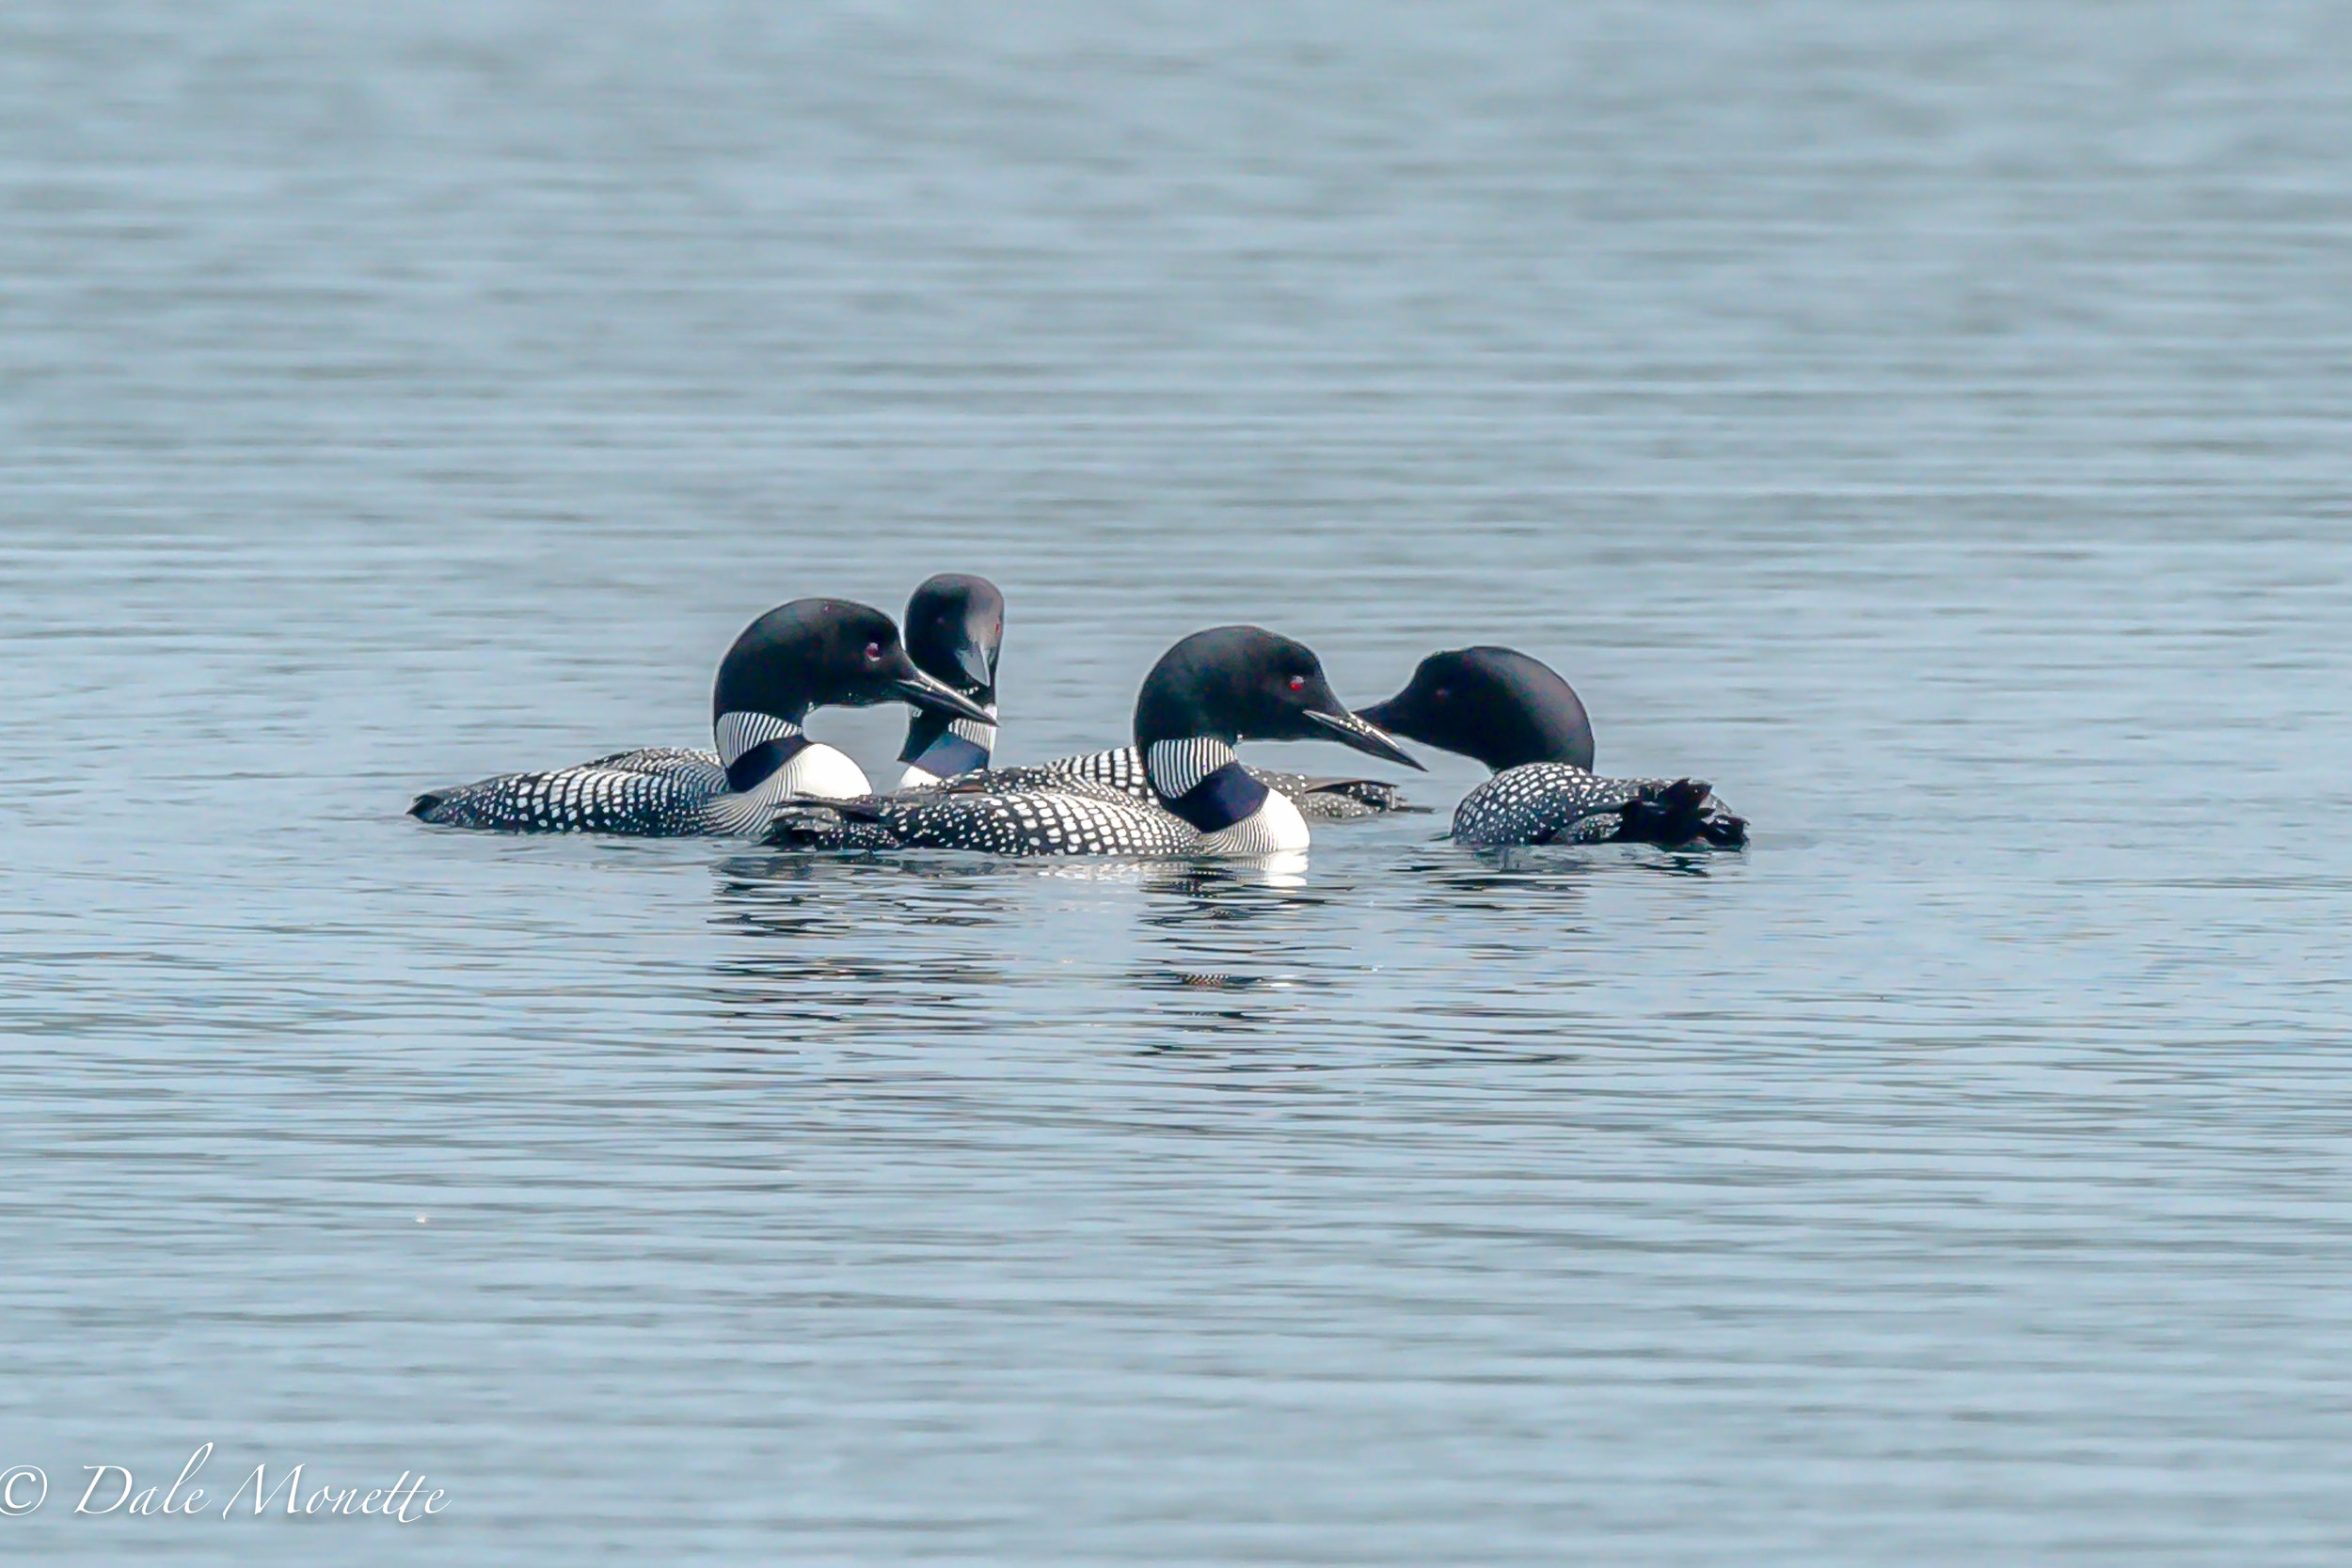   Yesterday was weekly loon survey day at Quabbin. &nbsp;The loons are starting to gather up. These are birds that failed this season nesting or never started. We saw 9 birds in one flock. &nbsp;7/14/15  